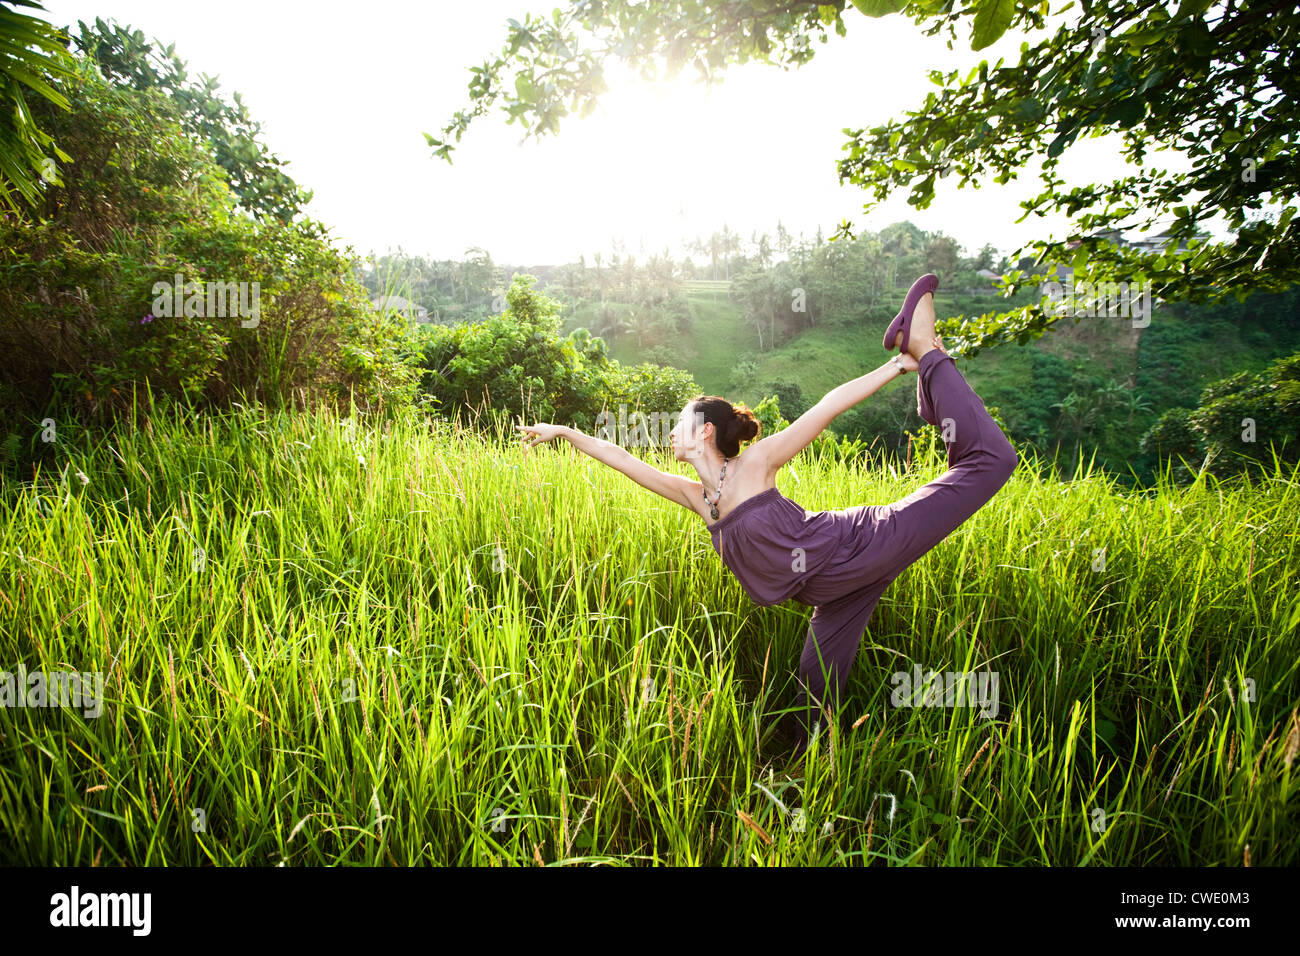 A athletic woman practing yoga in a lush field in Bali, Indonesia. Stock Photo